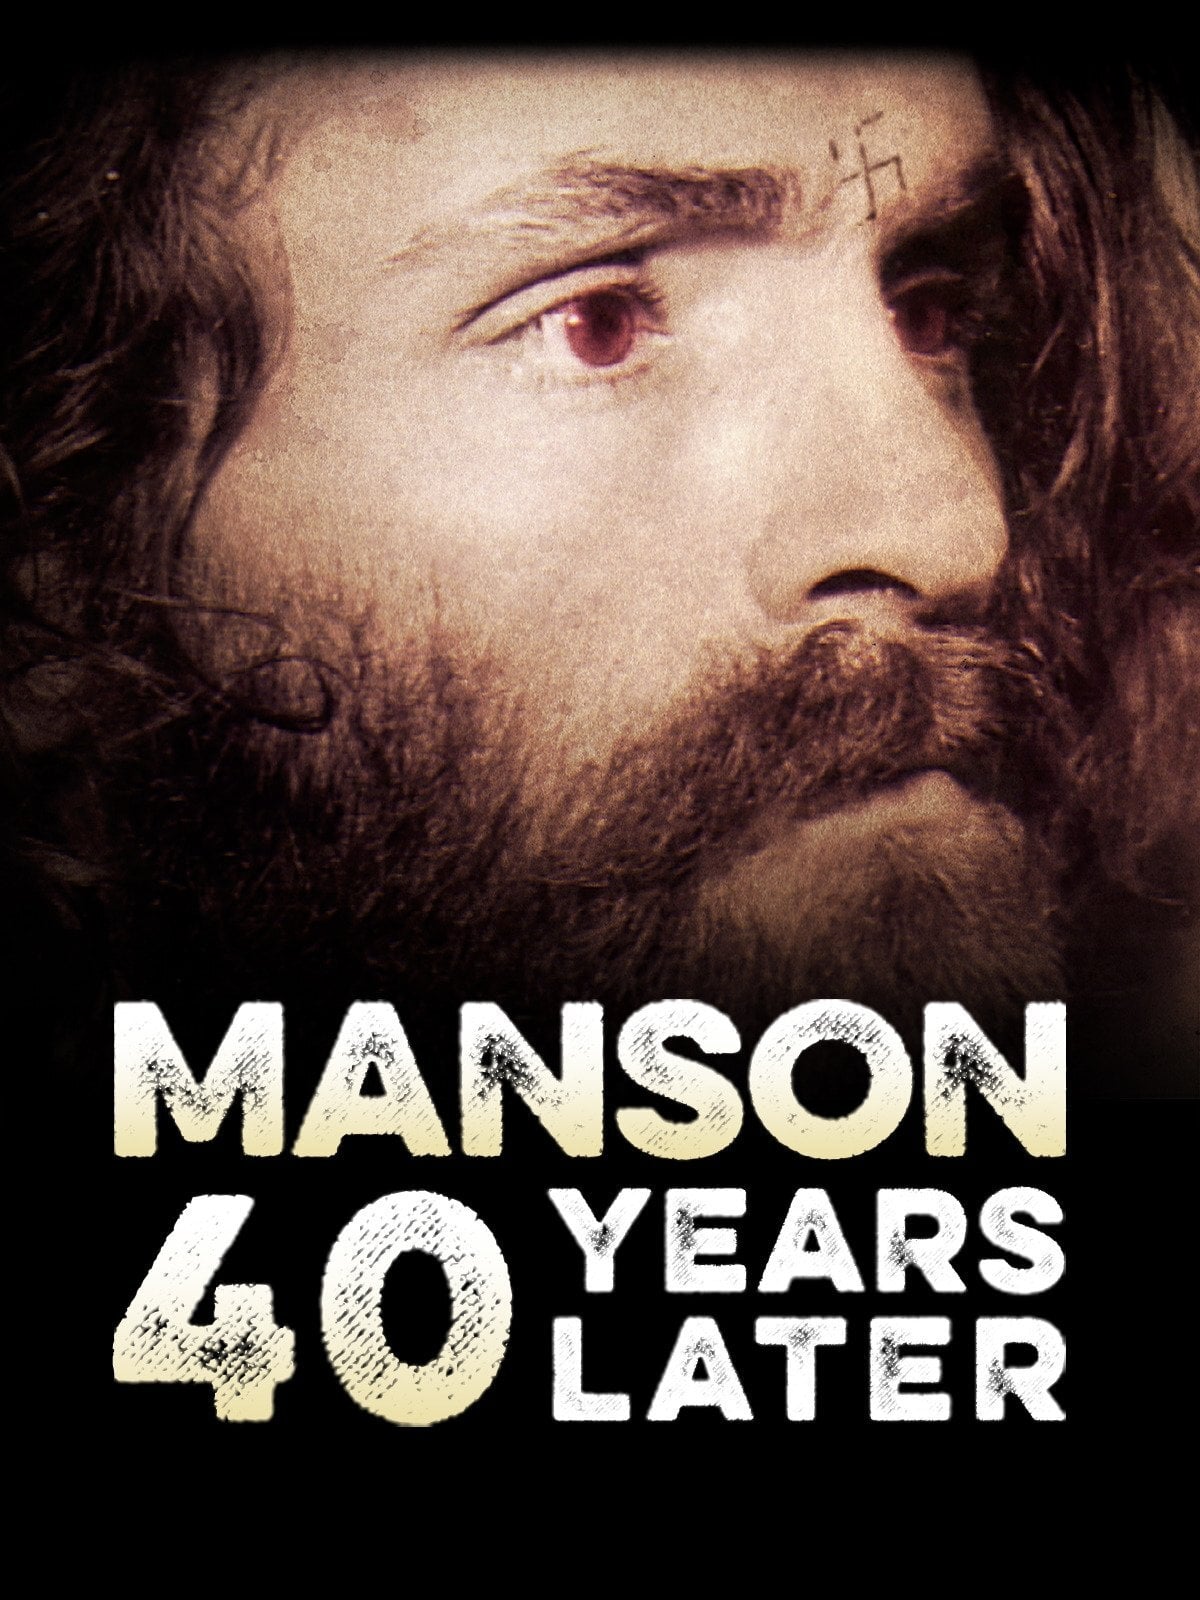 Manson: 40 Years Later